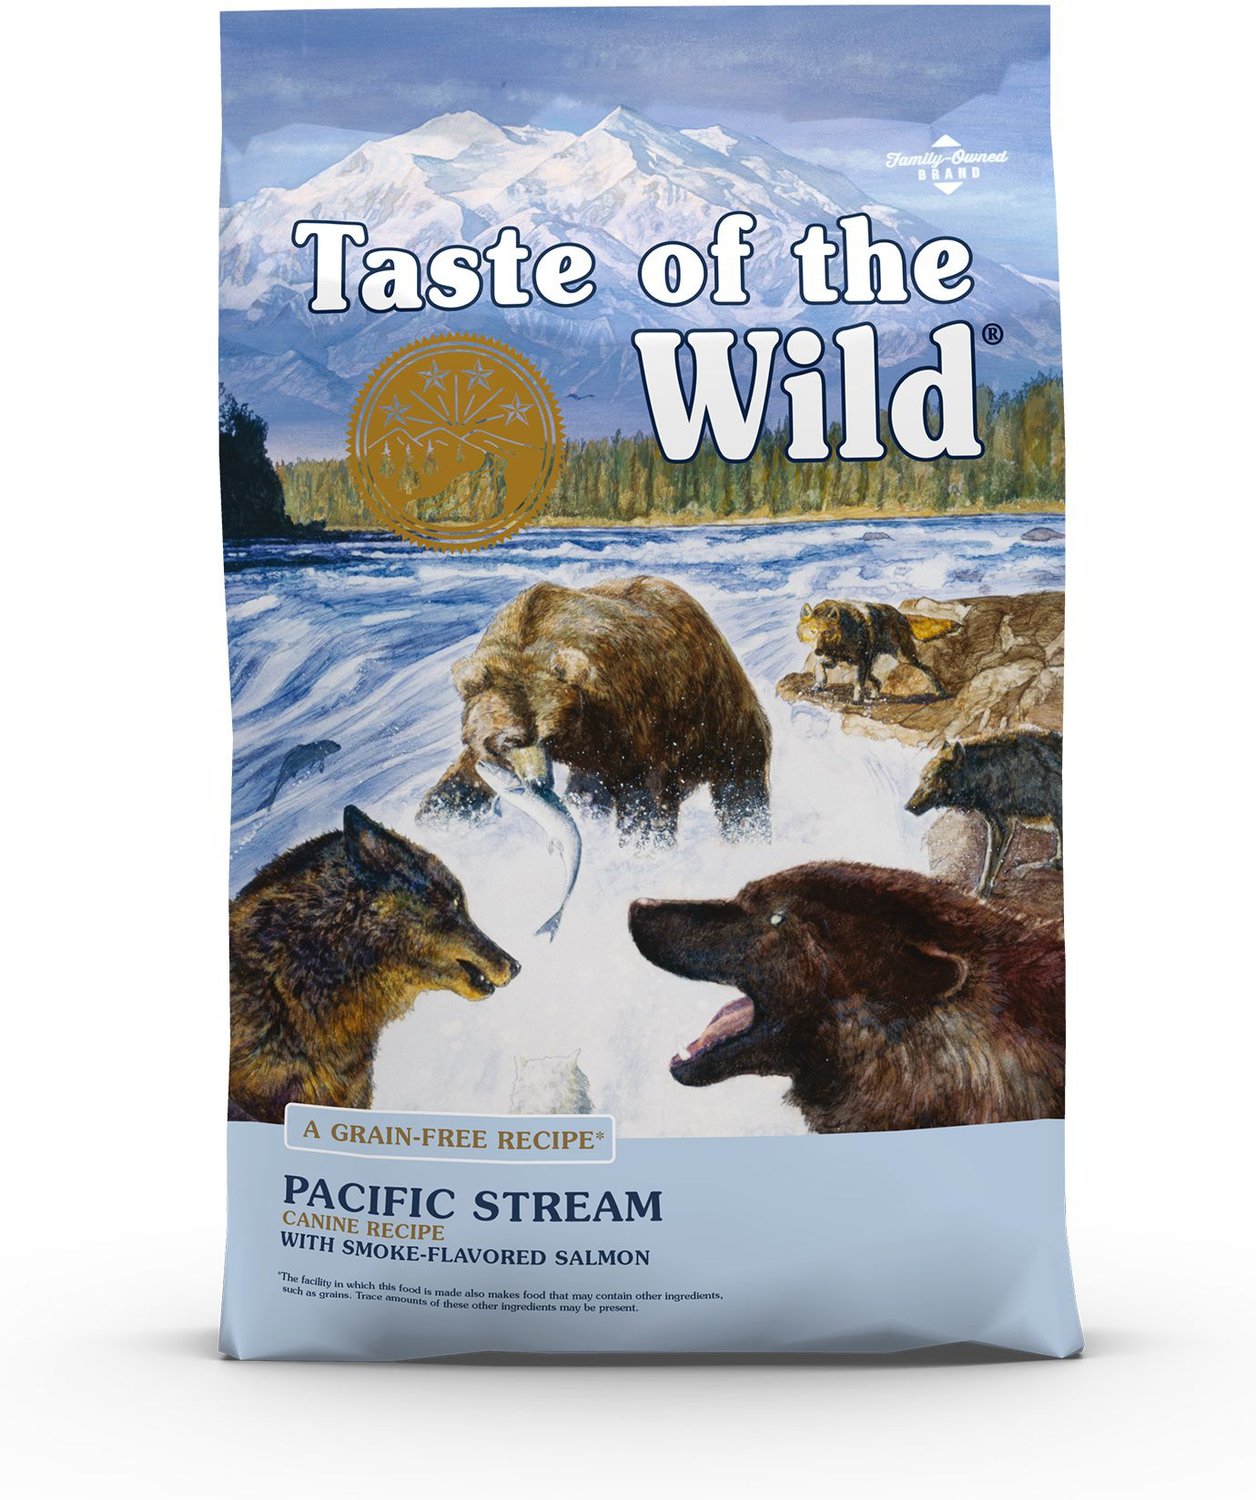 Taste of the Wild Pacific Stream Food For Dogs